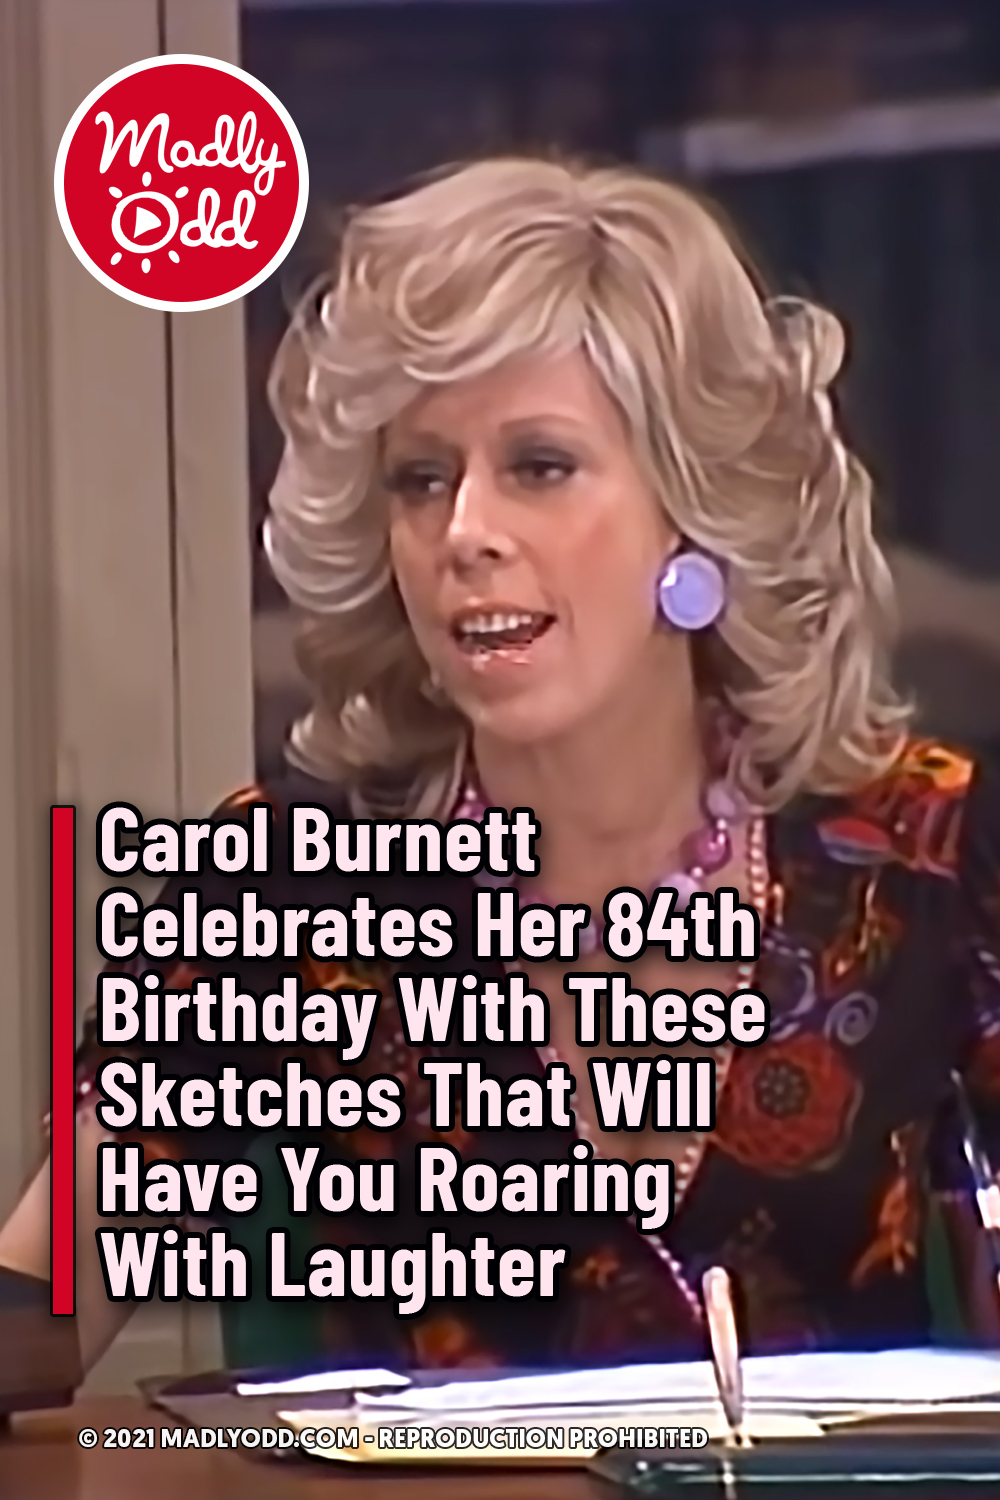 Carol Burnett Celebrates Her Birthday With These Sketches That Will Have You Roaring With Laughter